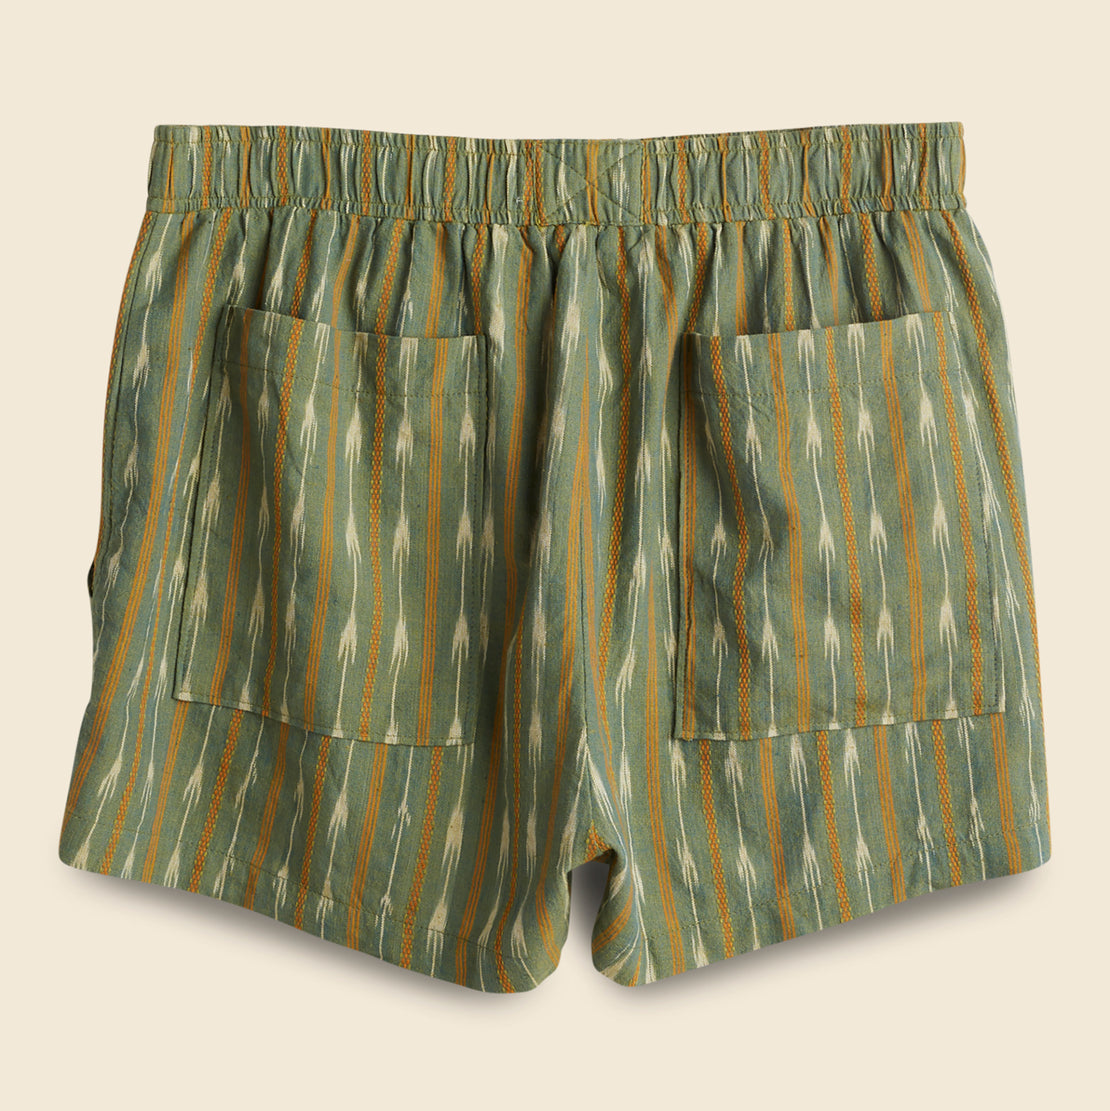 Shell Shorts - Pistachio Ikat - Mollusk - STAG Provisions - W - Shorts - Solid